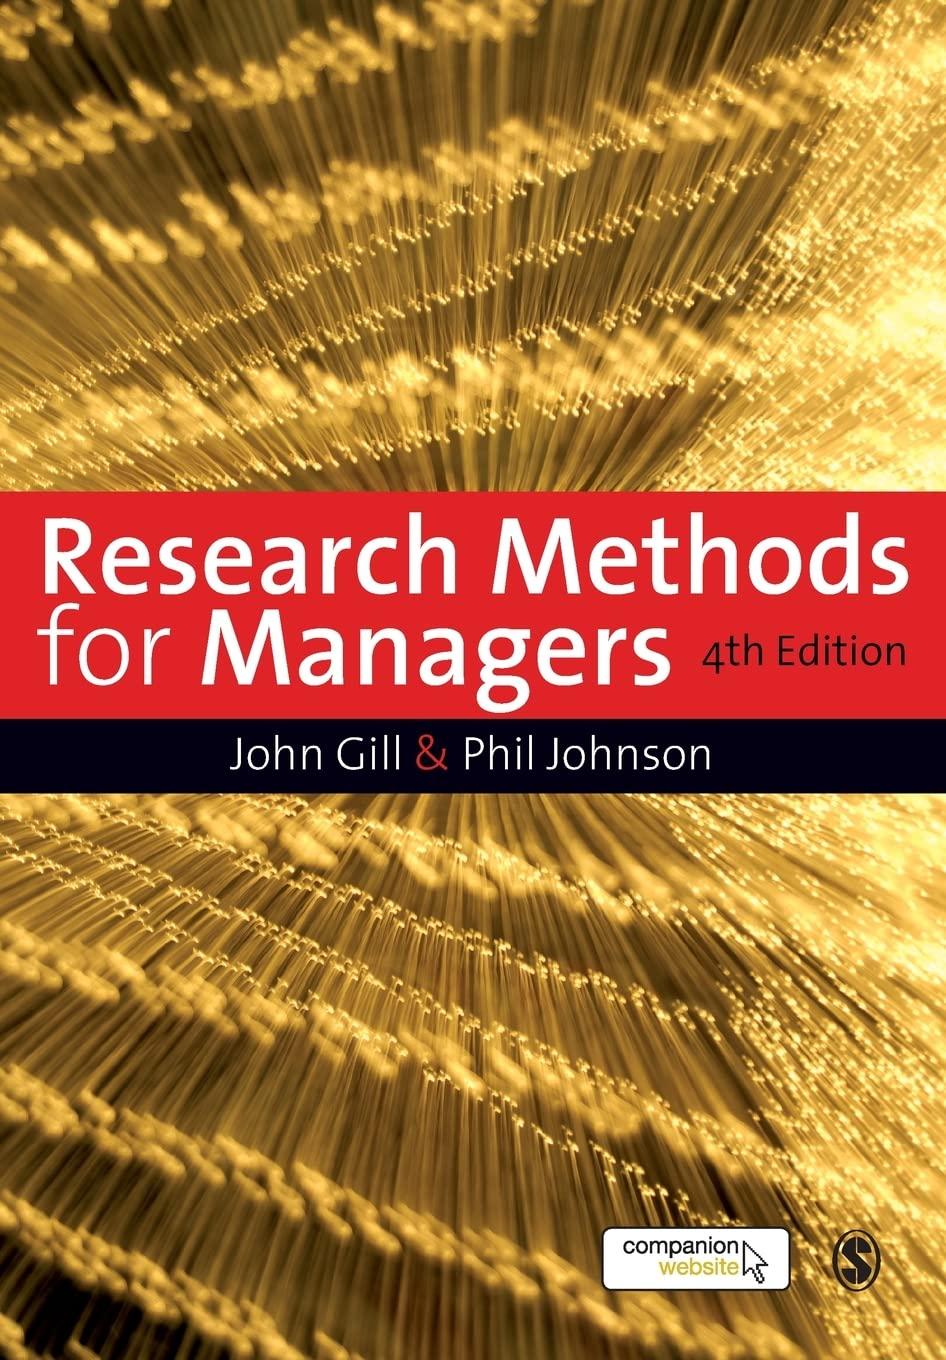 research methods for managers 4th edition john gill, phil johnson 1847870945, 9781847870940